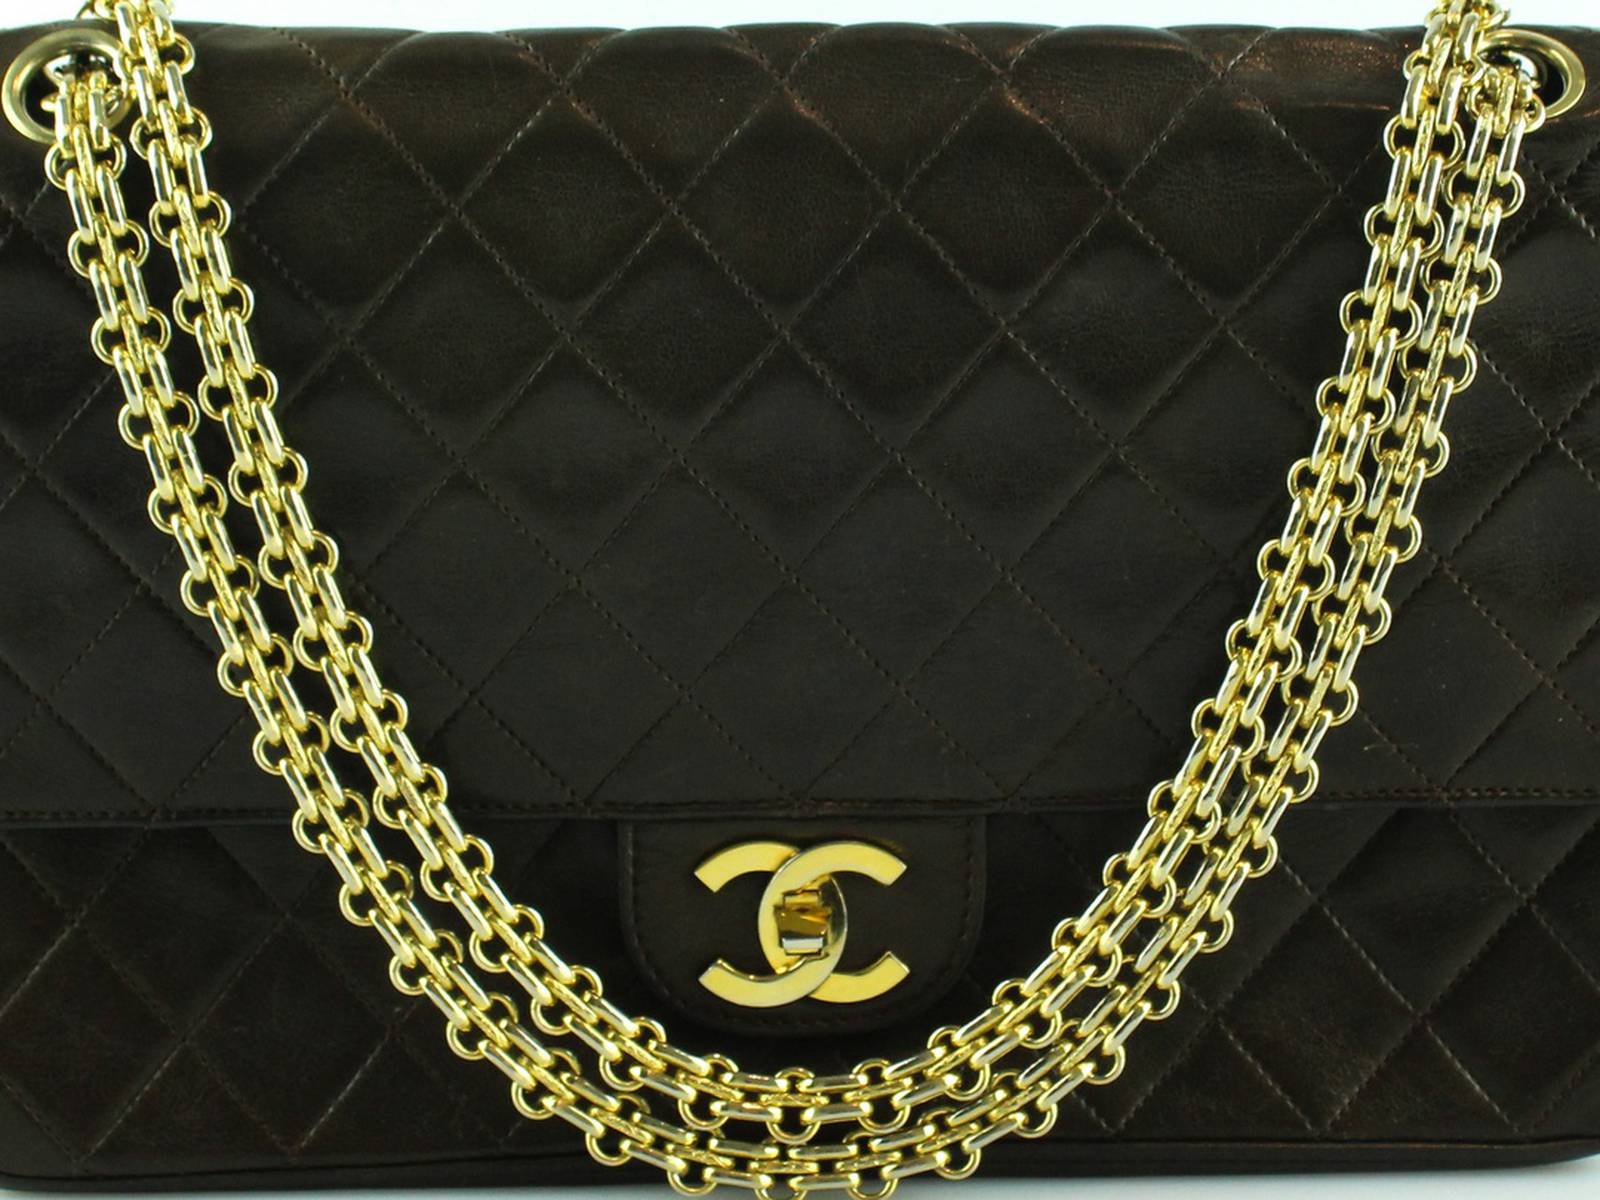 Chanel lifts its prices in Europe and Asia by up to 6% – The Irish